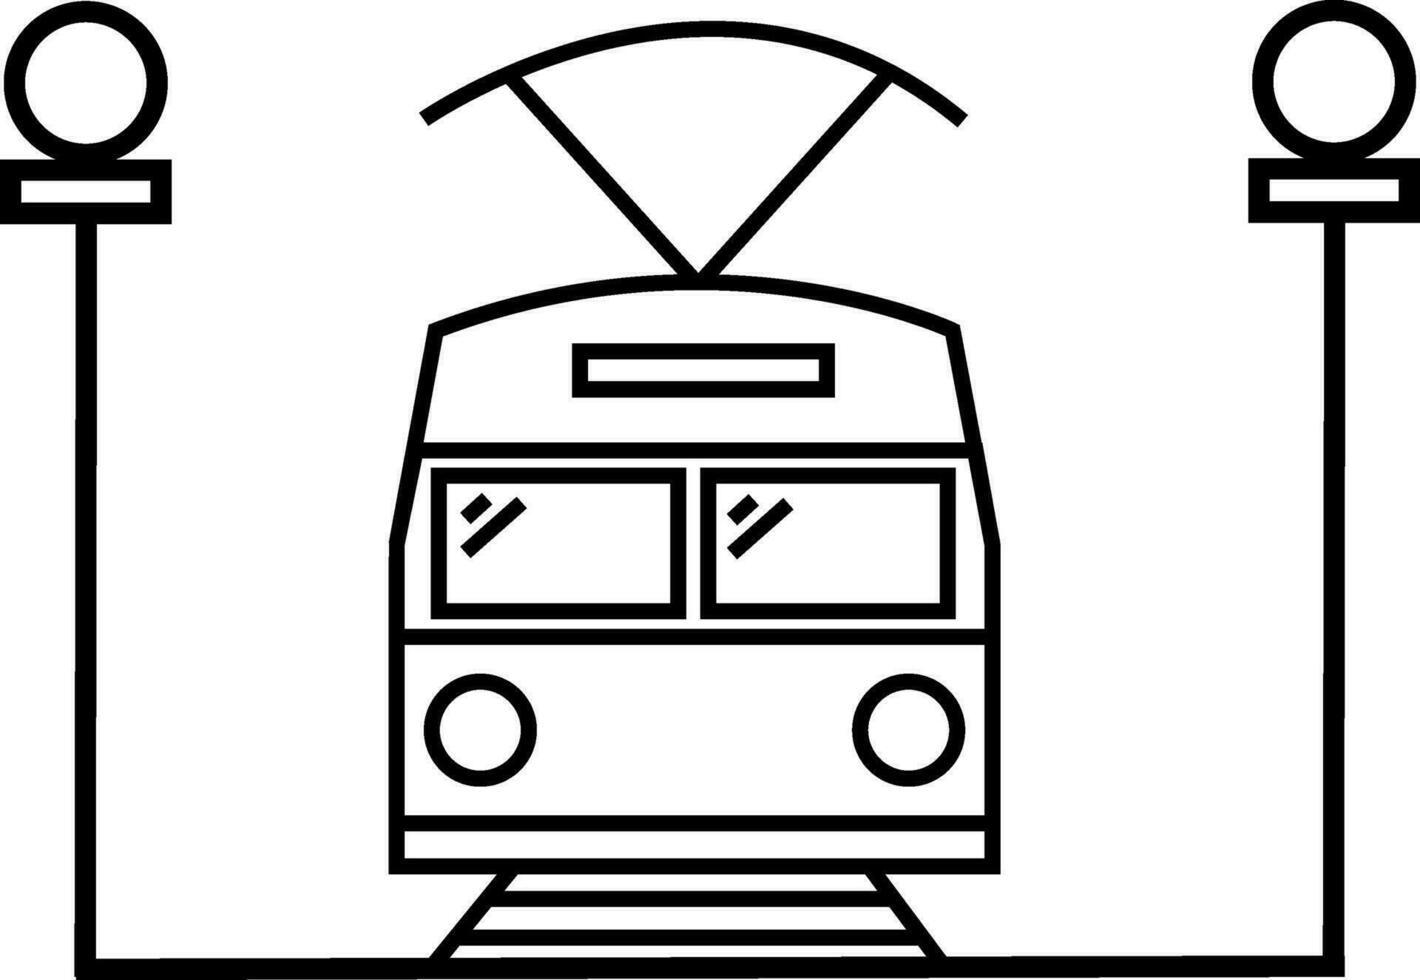 Flat illustration of train in black and white color. vector